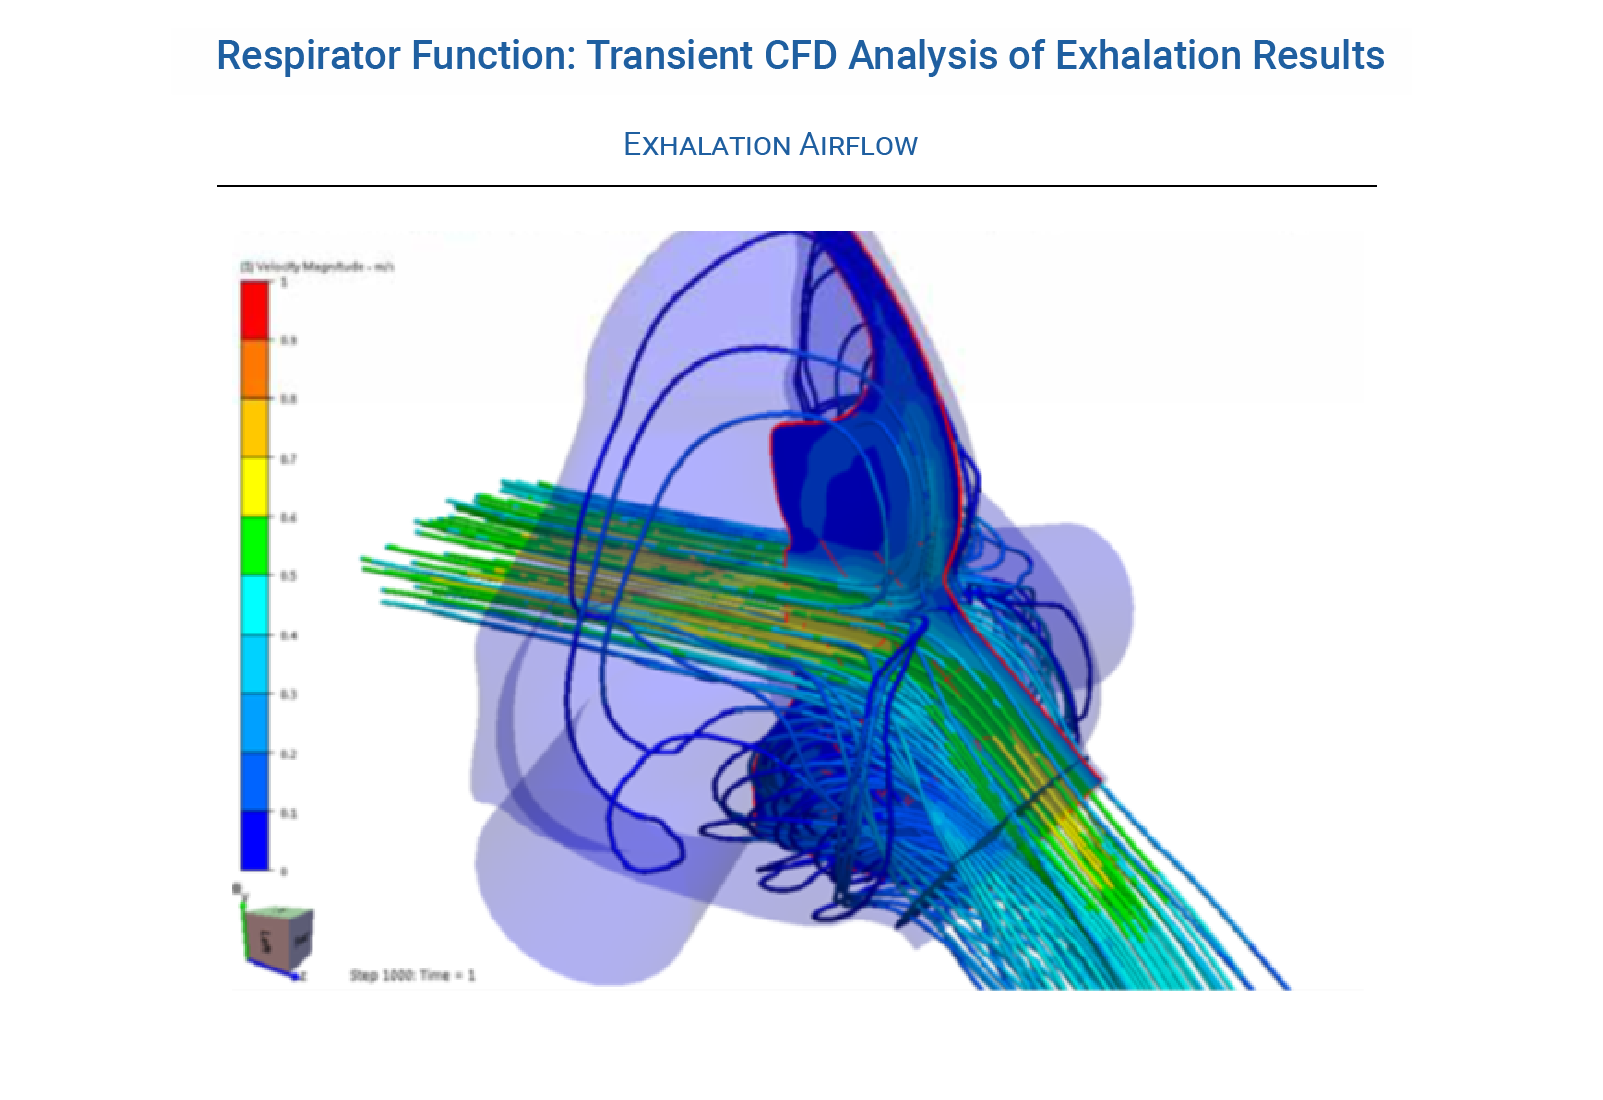 Respirator Mask Function During Breathing Cycle - Transient CFD Analysis of Exhalation Results - Predictive Engineering CFD Consulting Services